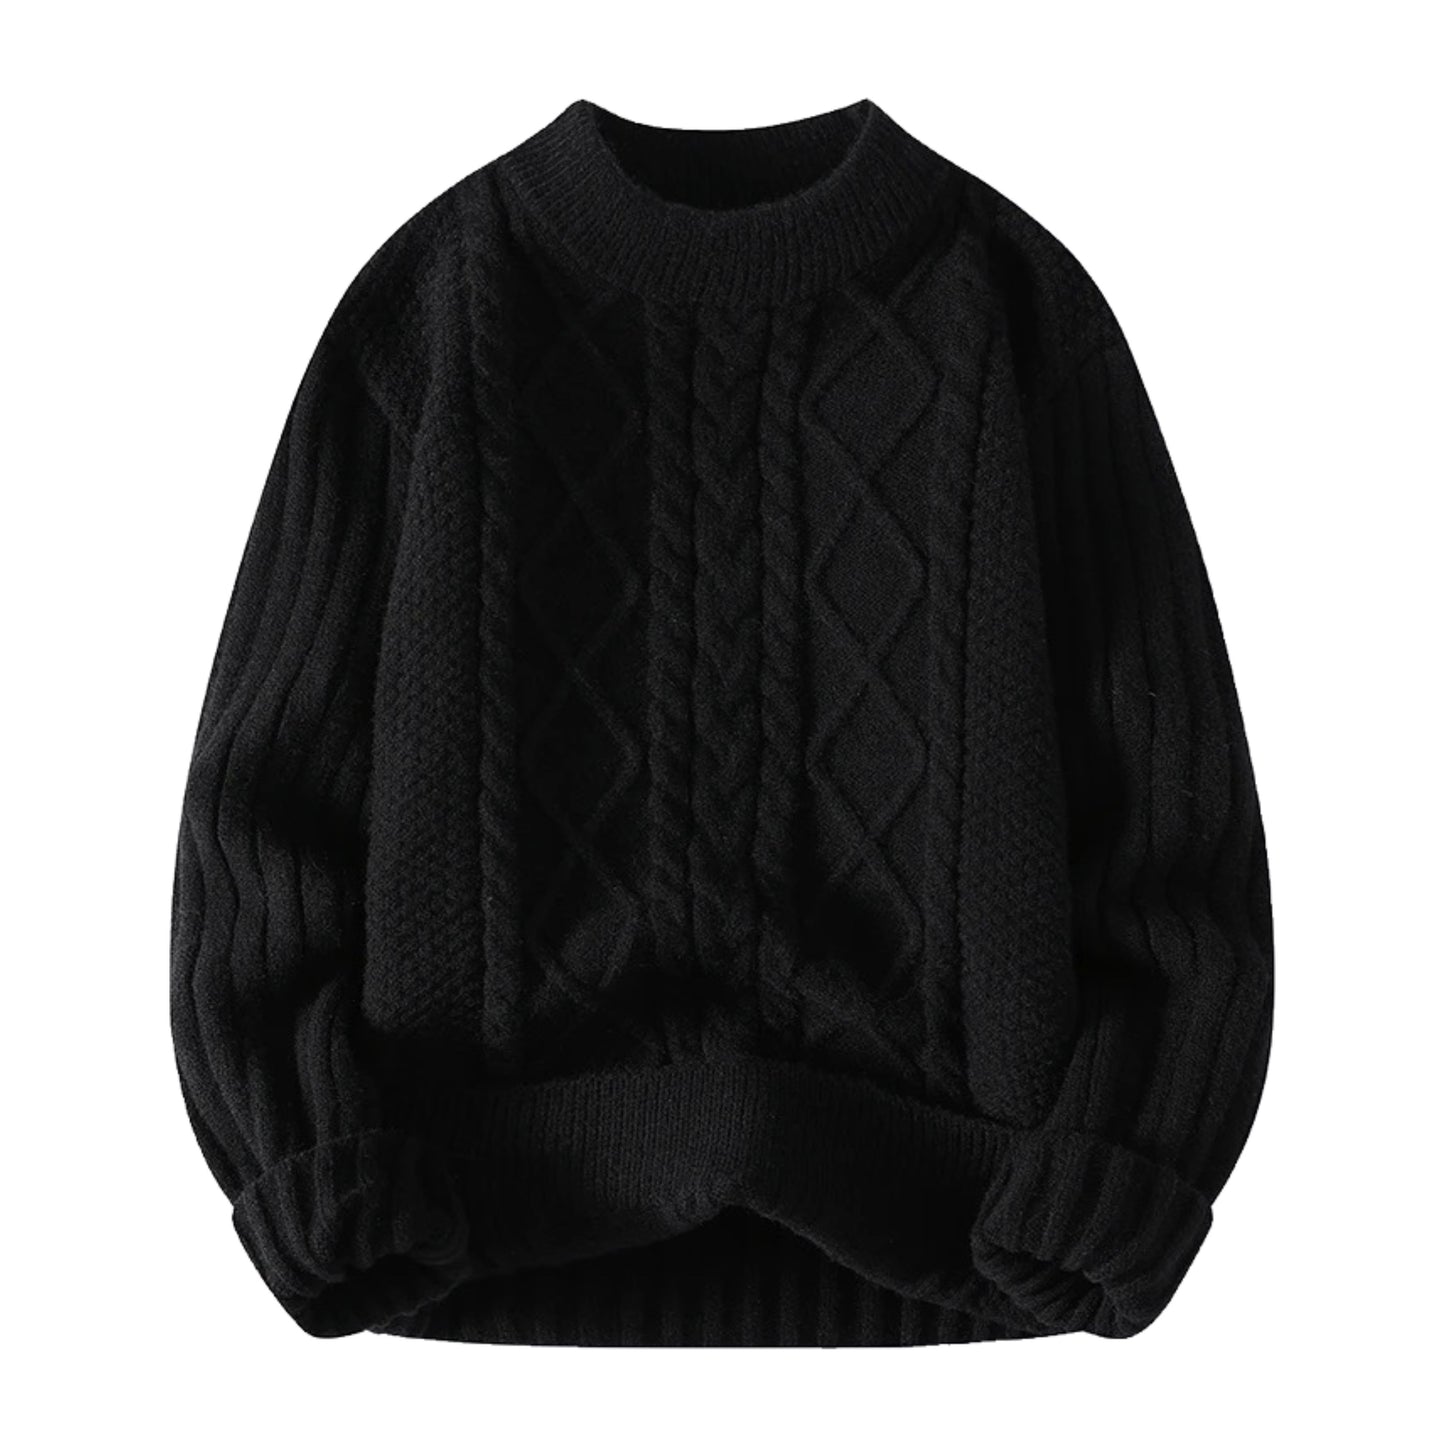 Black Cable Knitted Pull Over Sweater